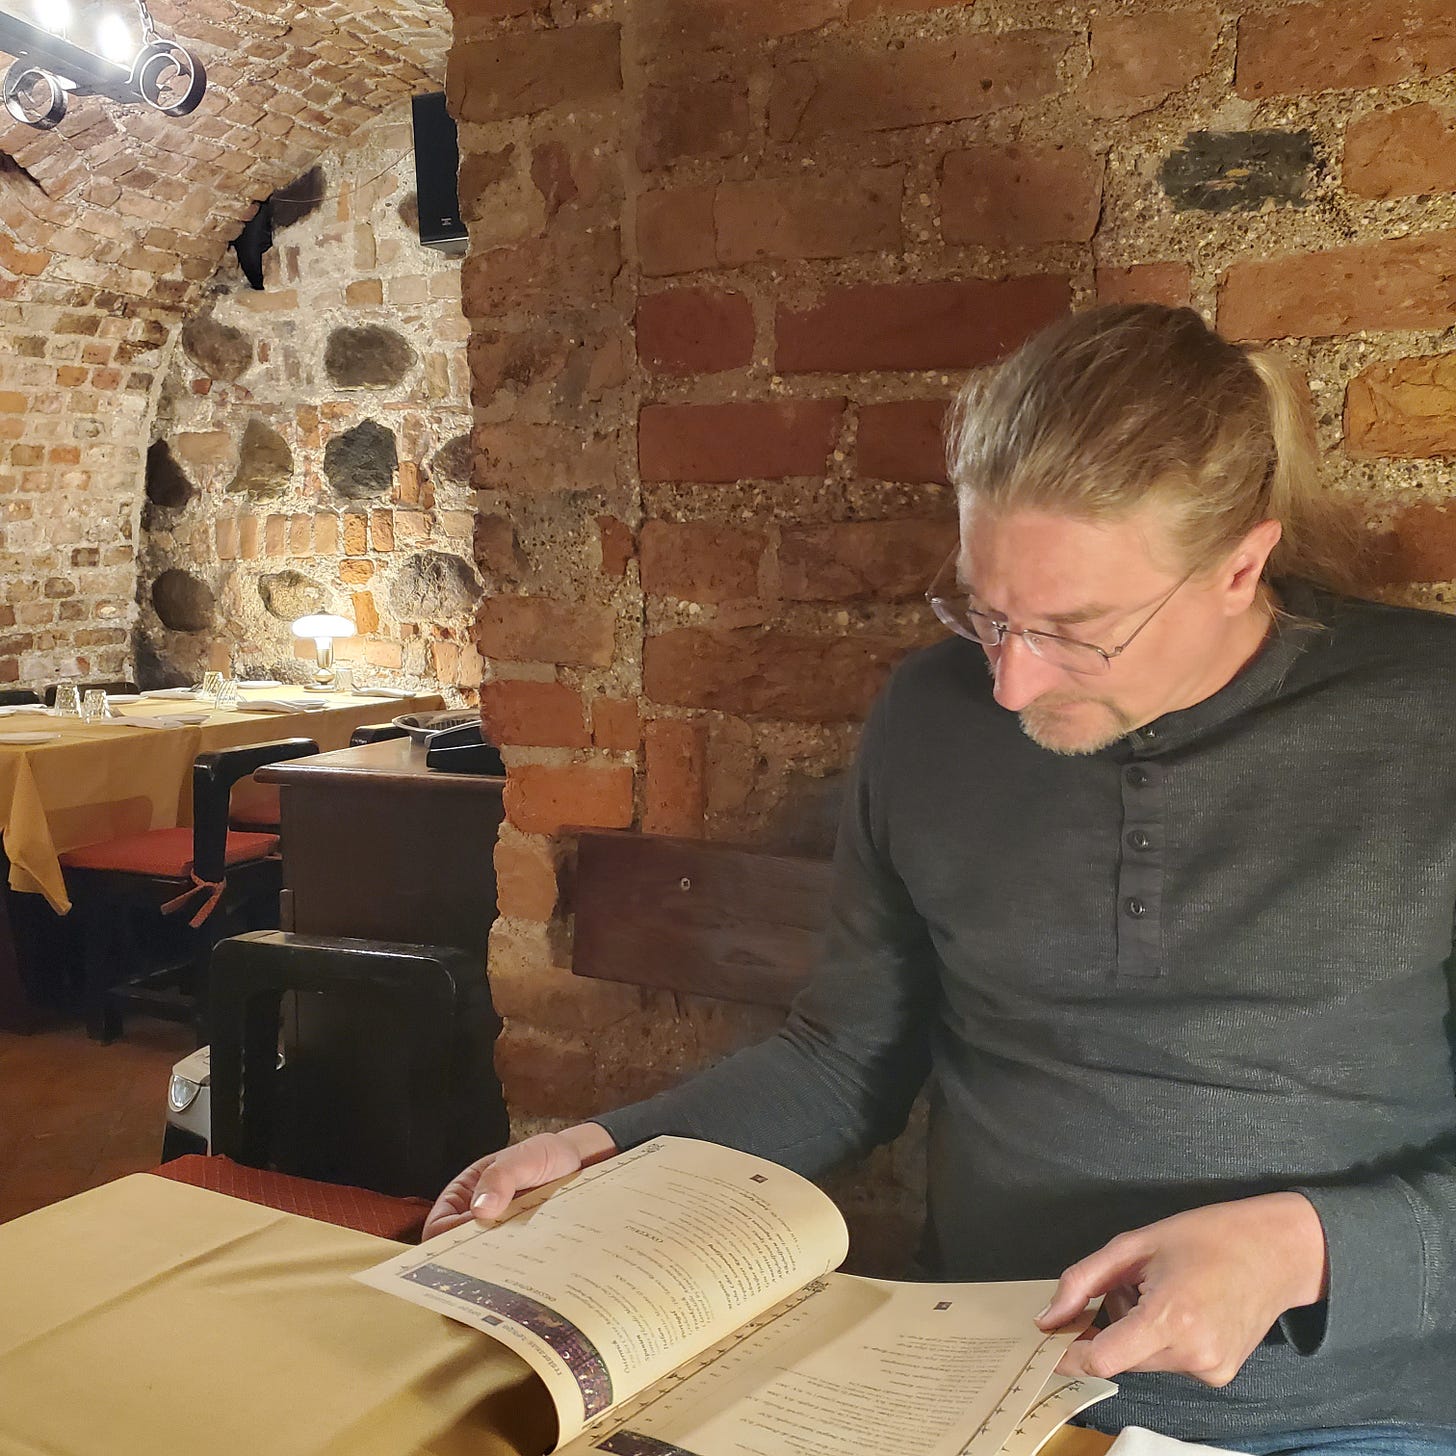 A white man with long blond hair ponders a menu while sitting in a brick alcove.